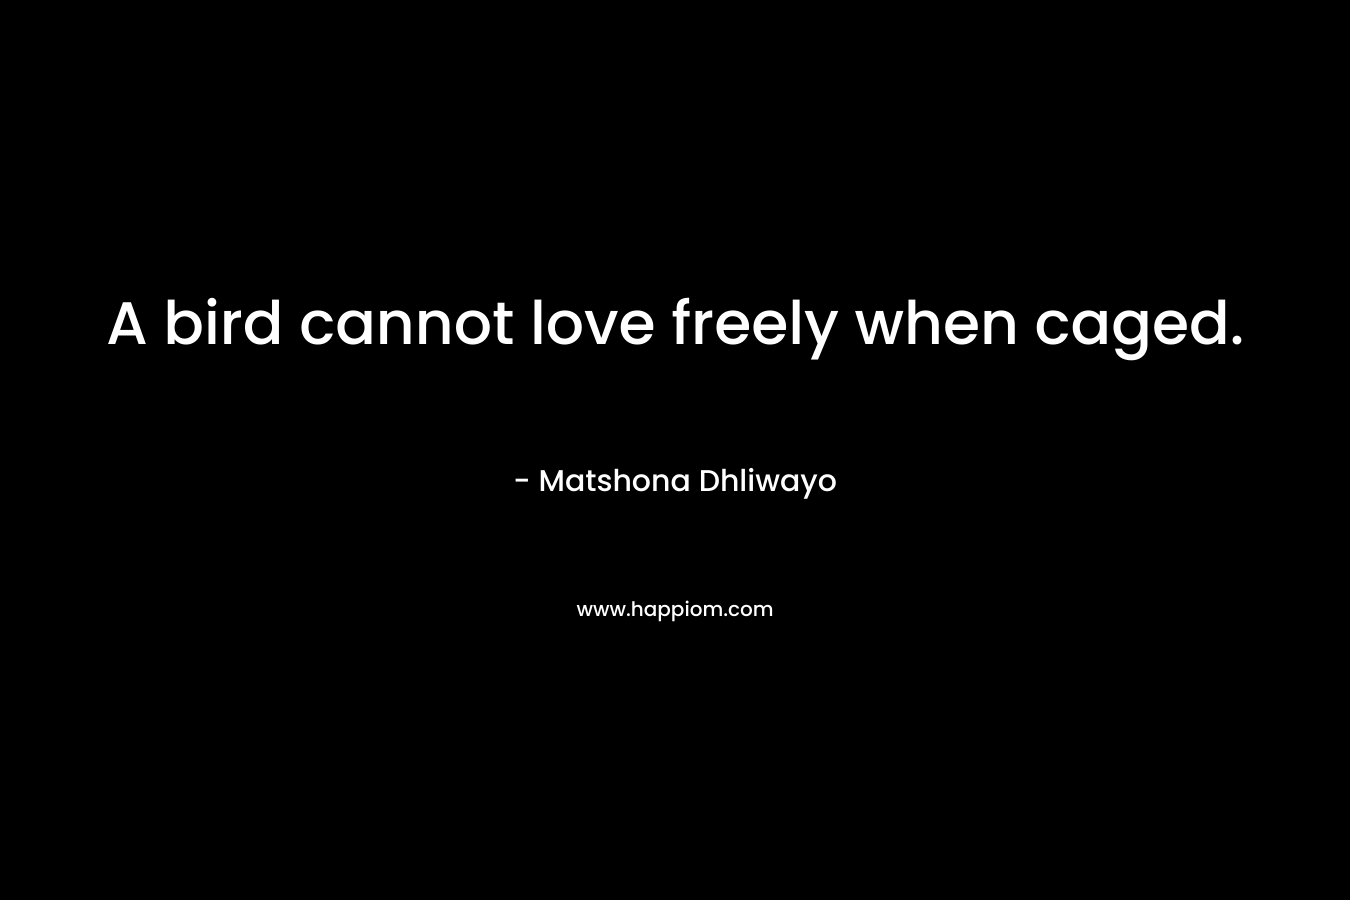 A bird cannot love freely when caged.